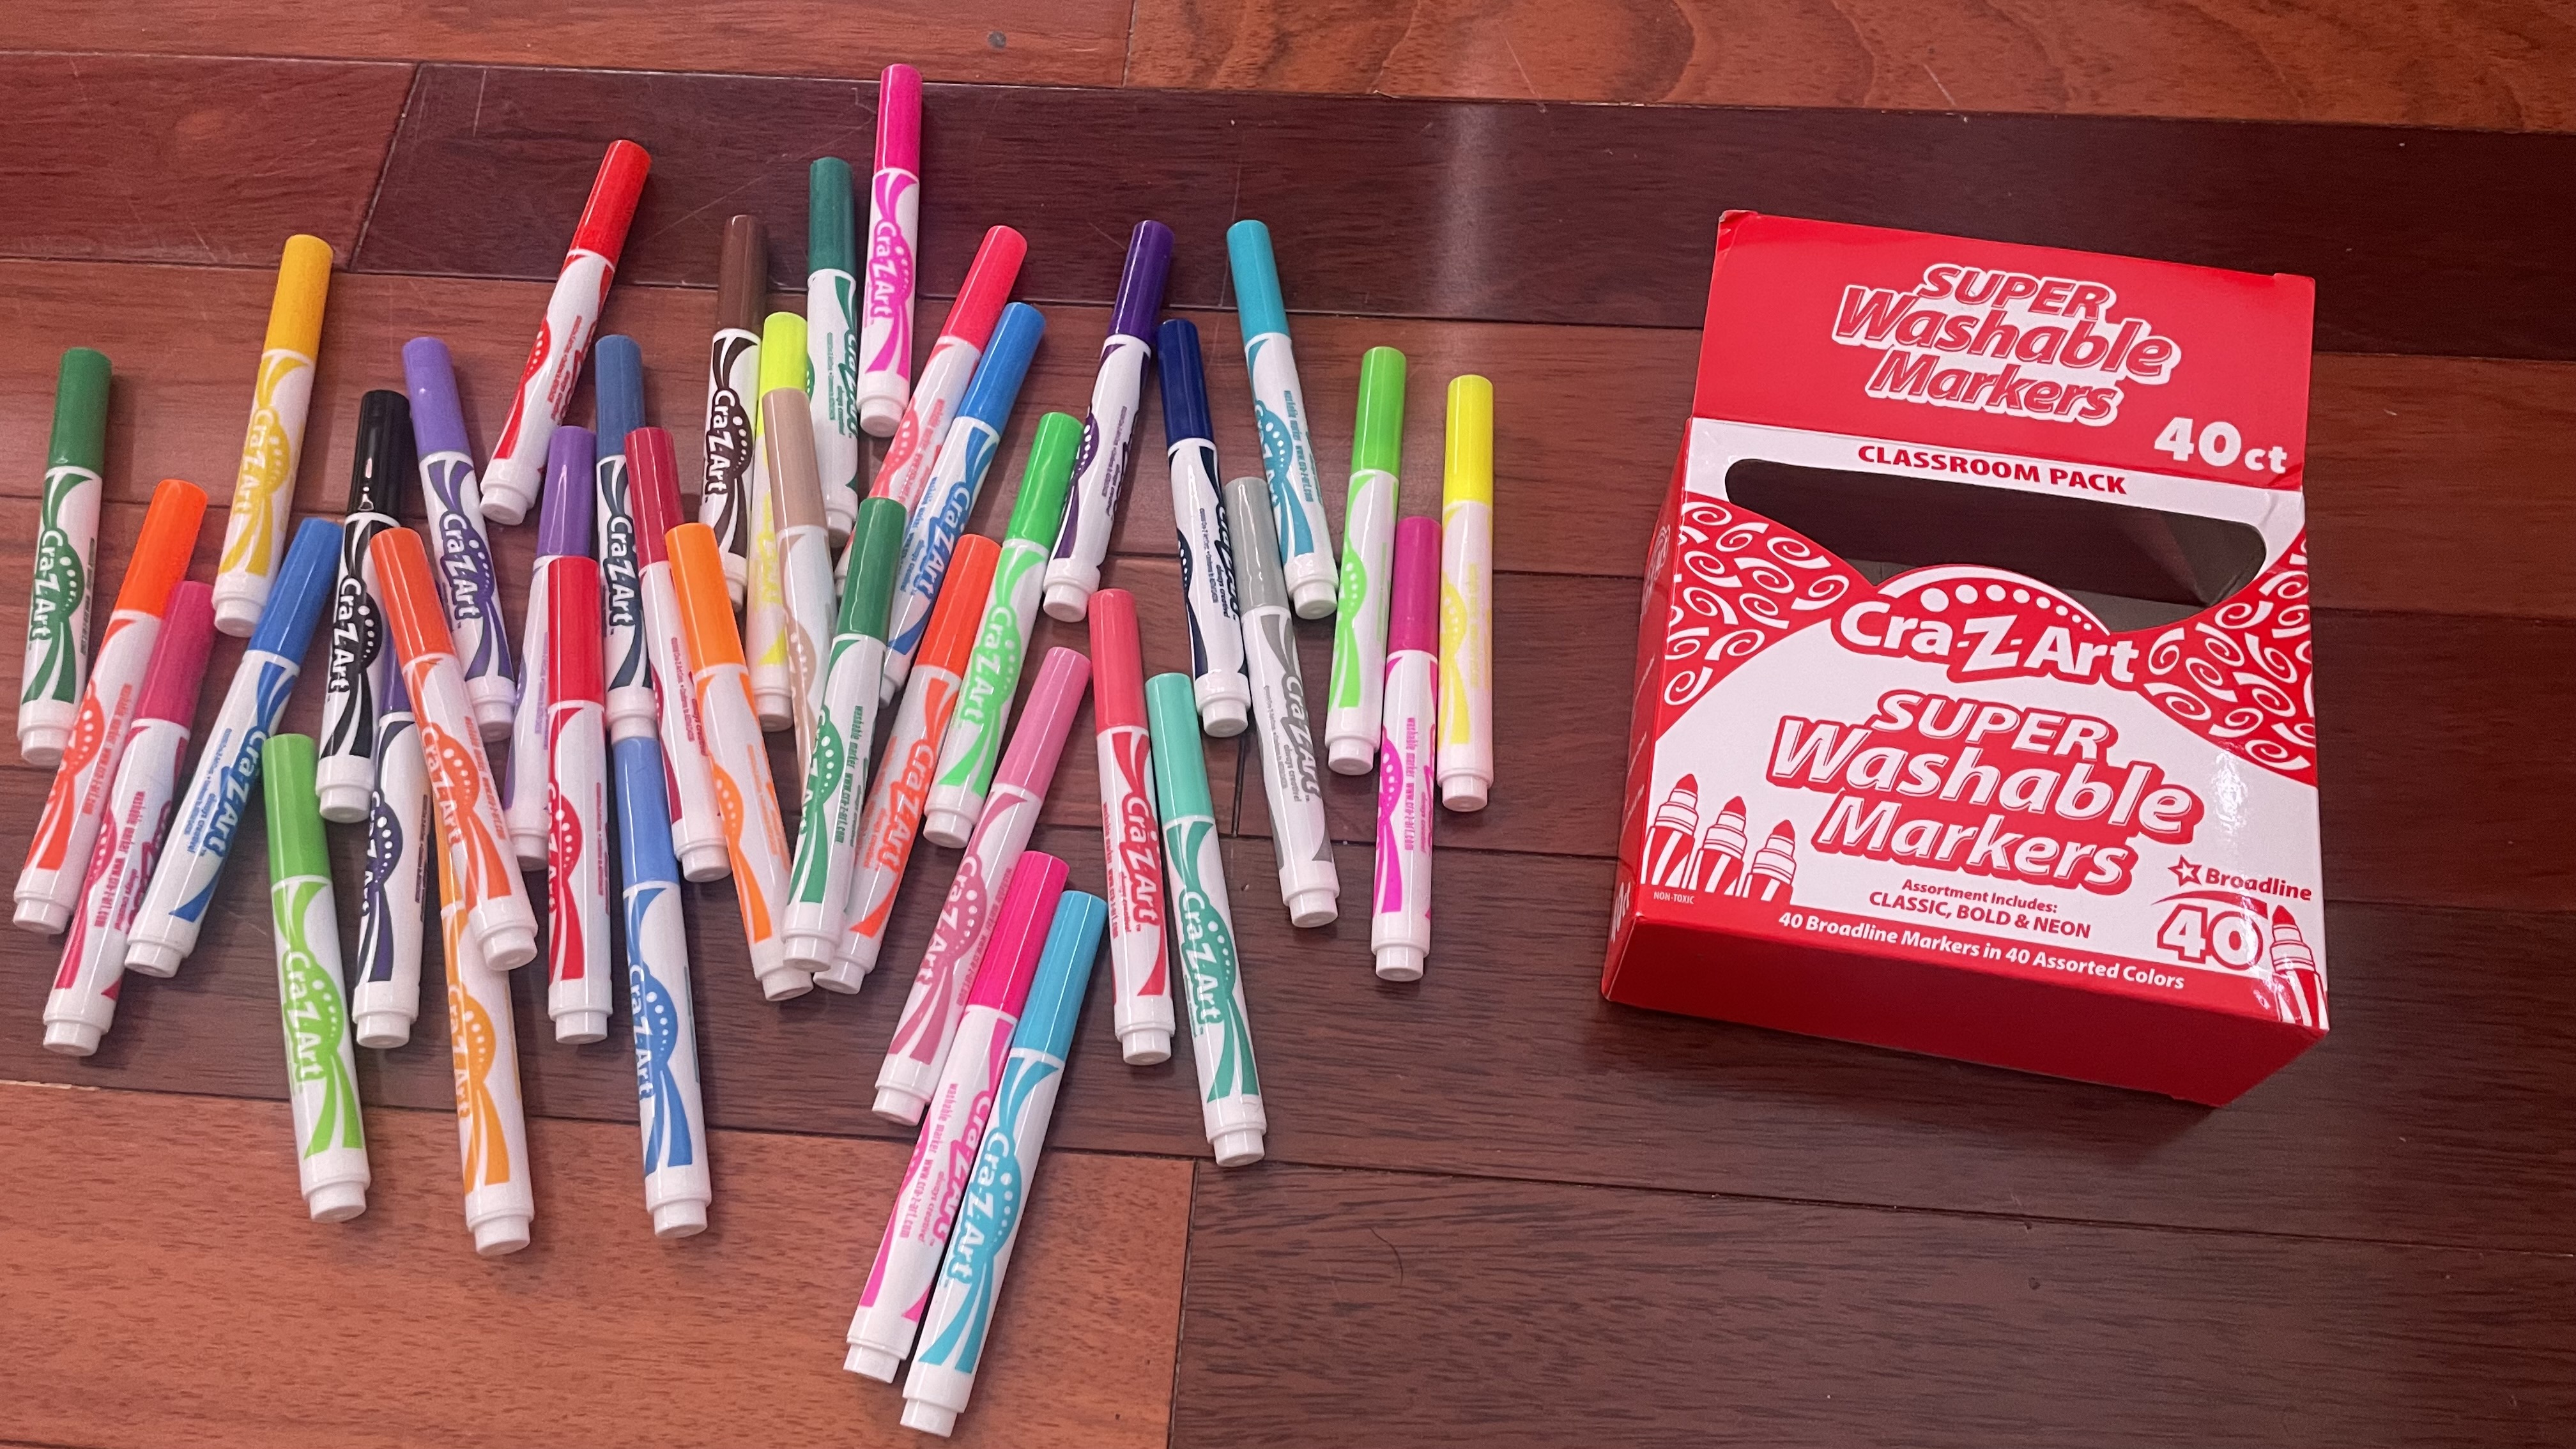 Cra-Z-Art Washable Neon Markers